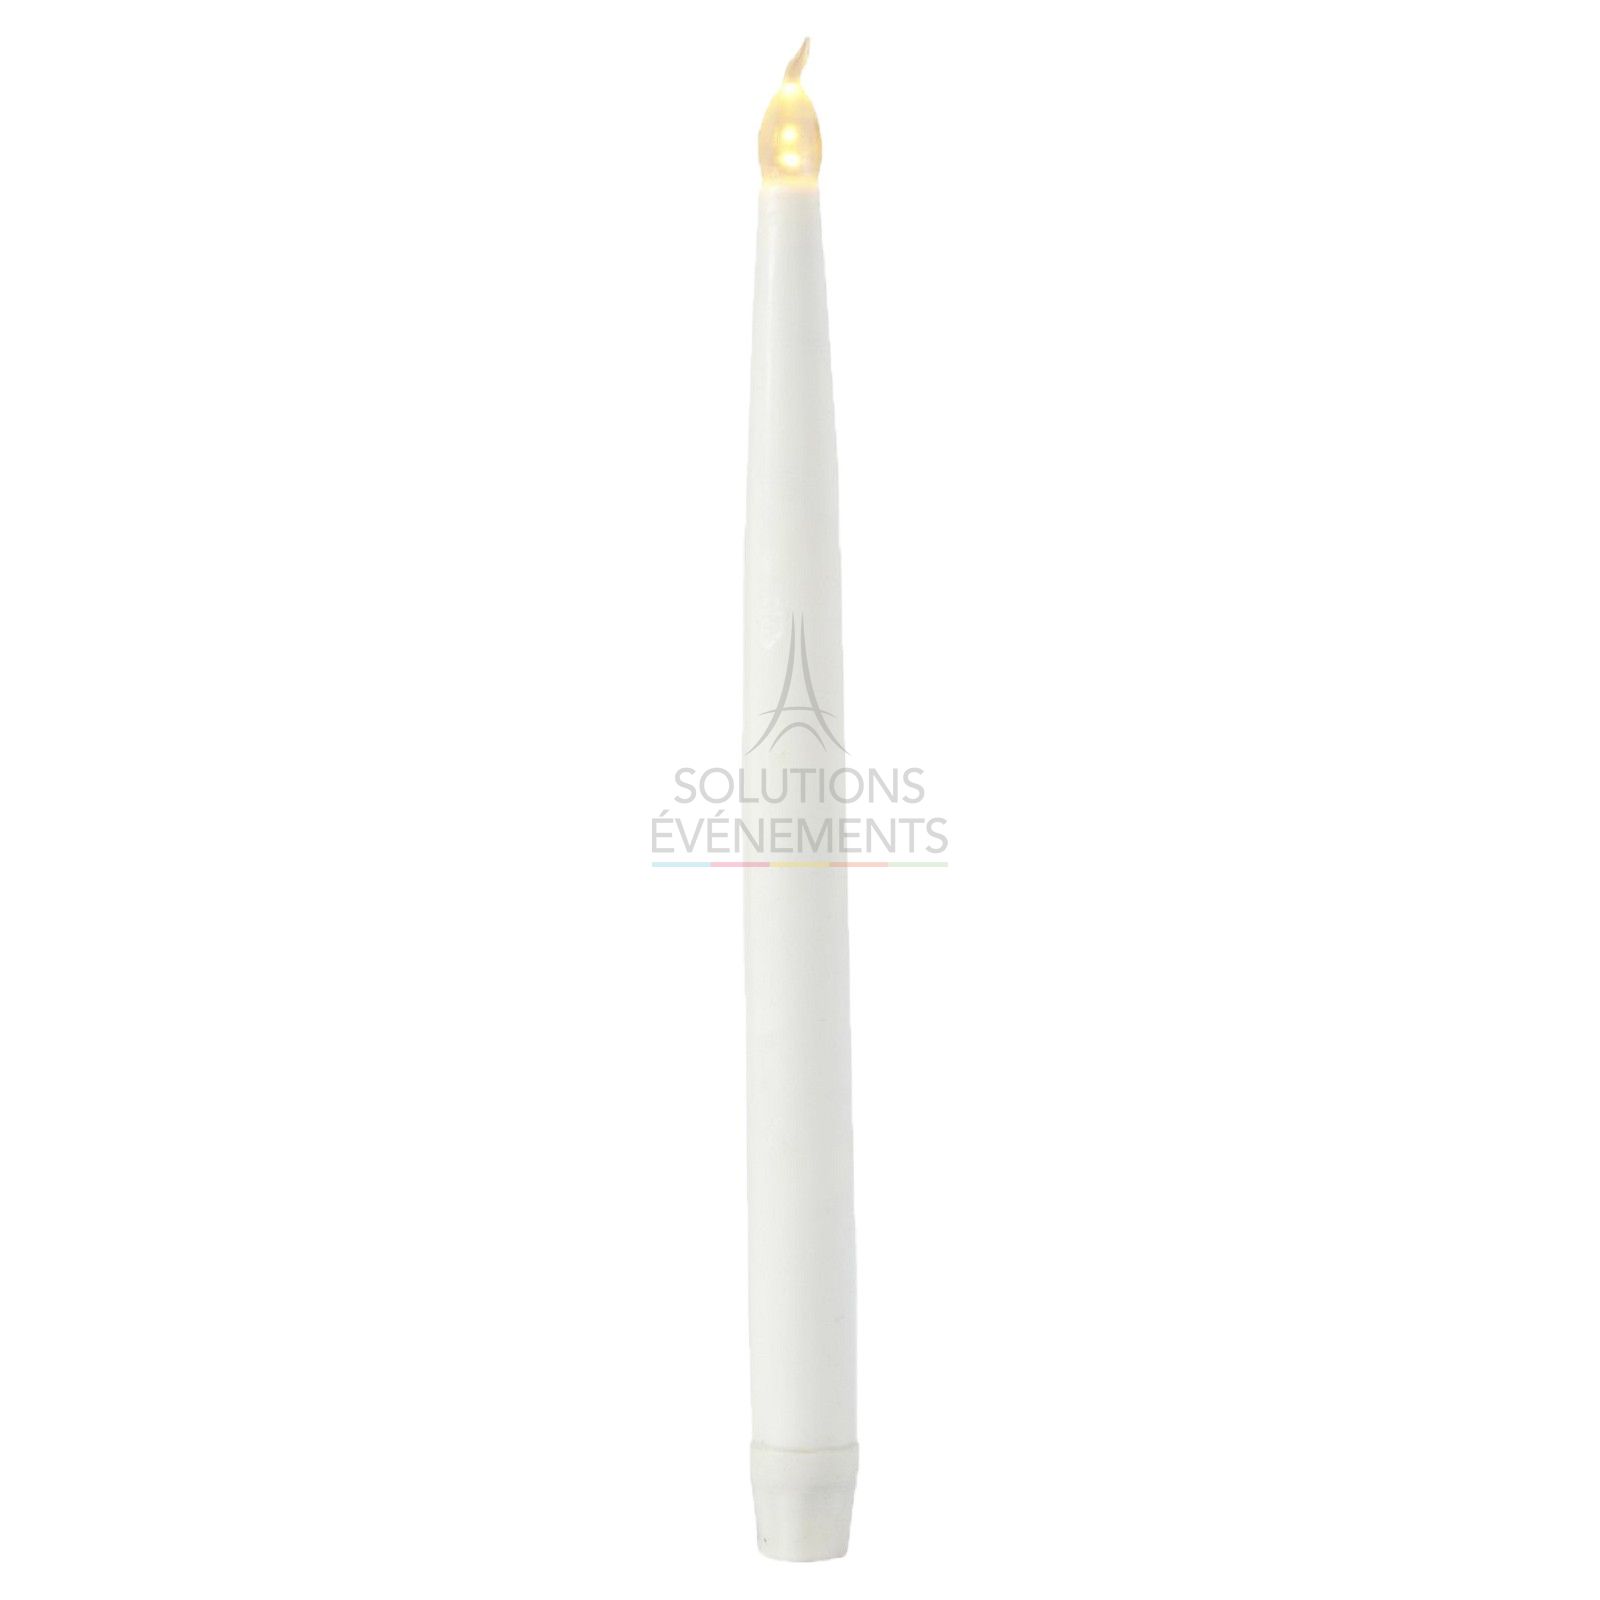 Rental of battery-powered LED candles